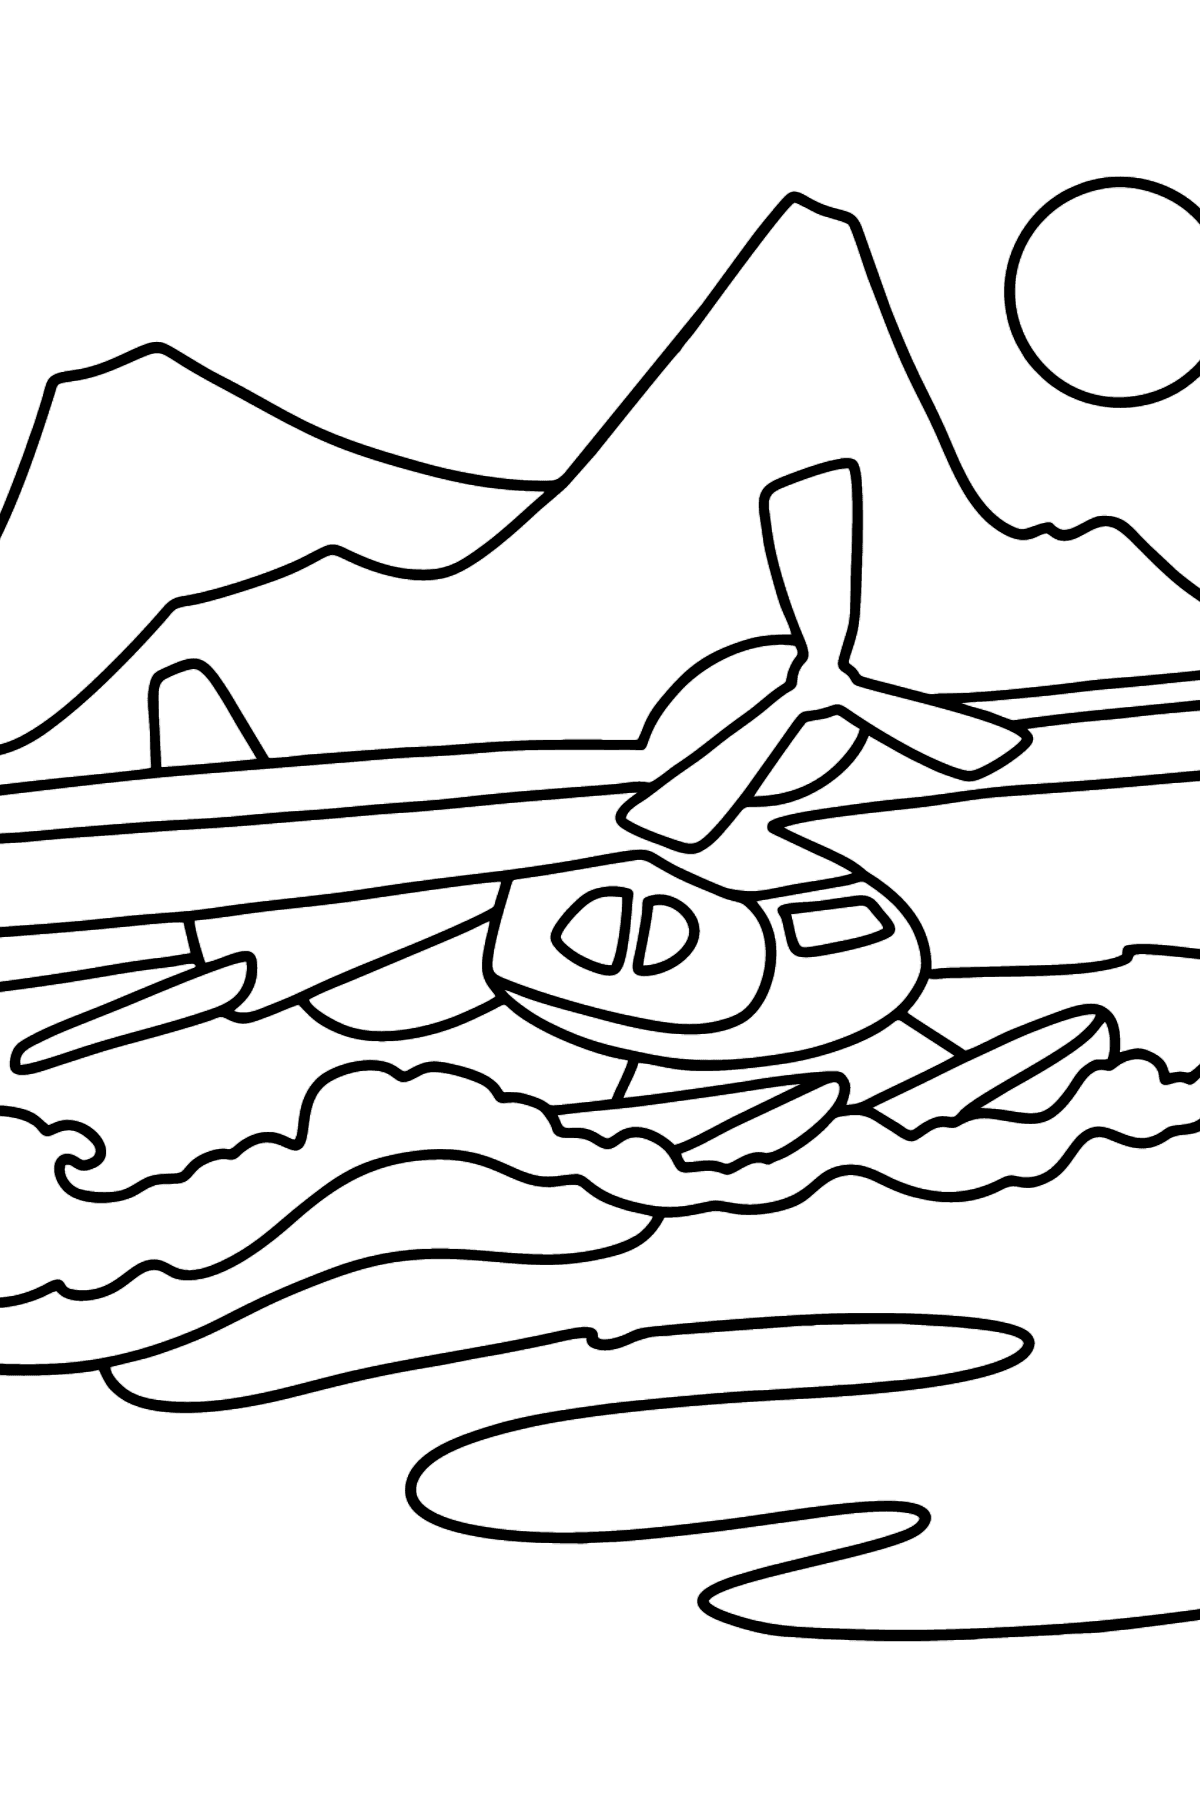 Seaplane coloring page - Coloring Pages for Kids